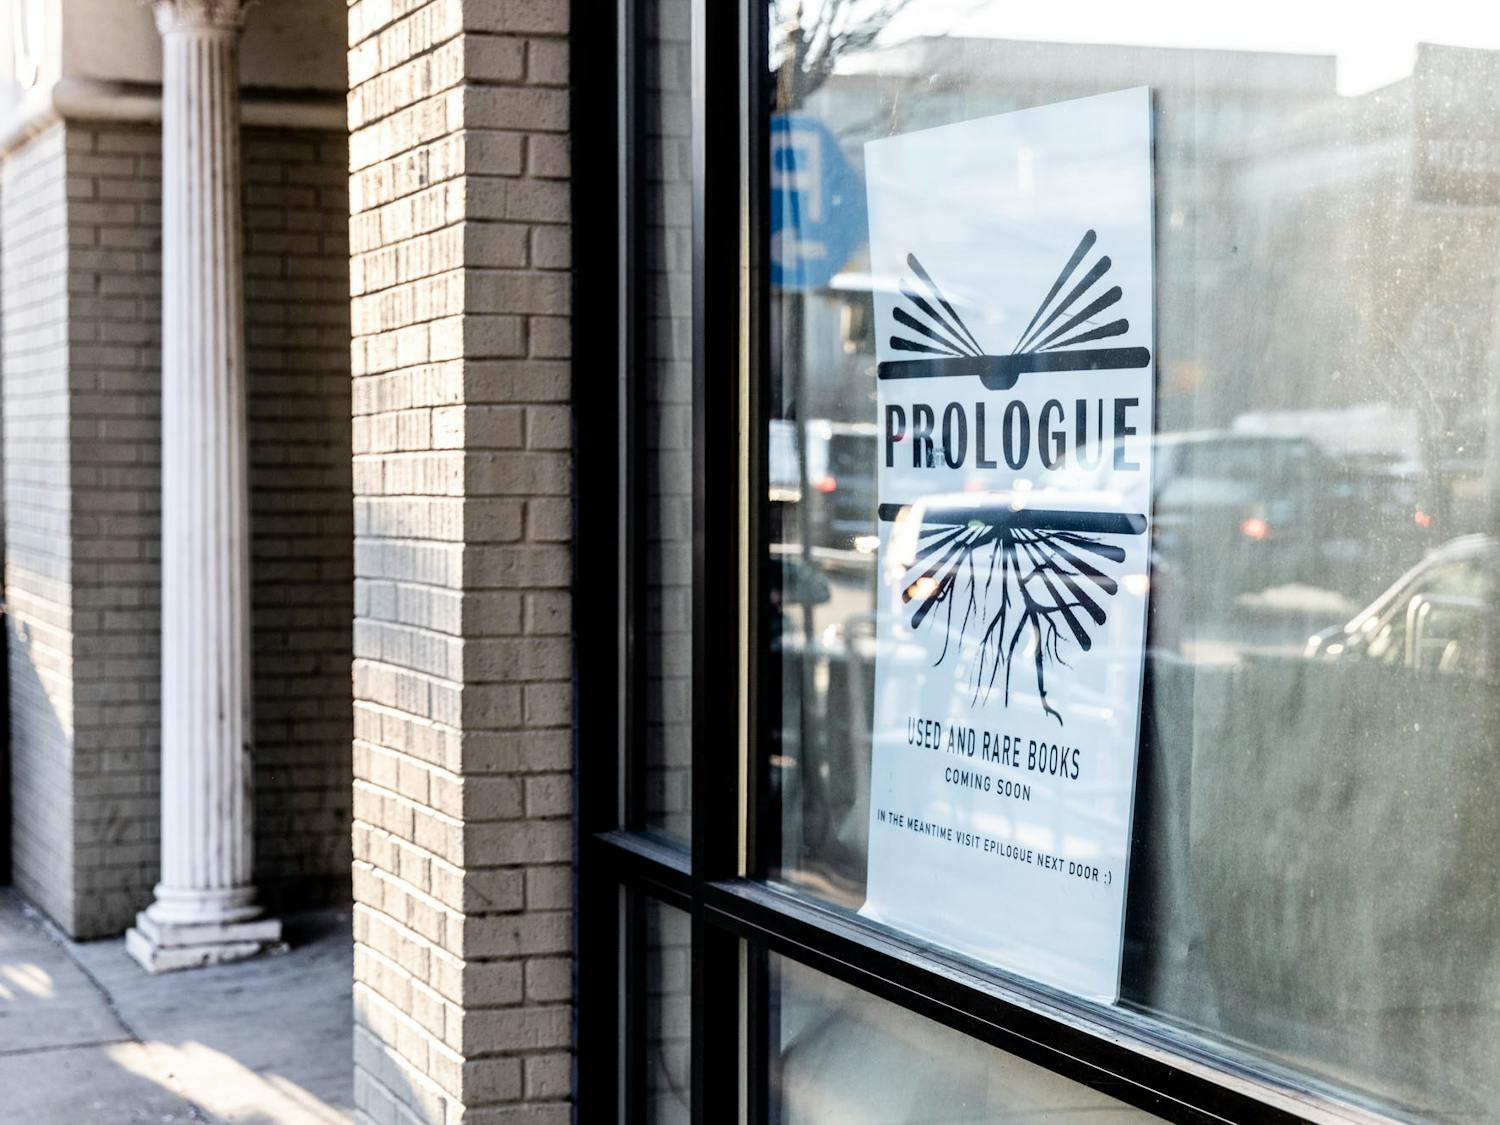 A "coming soon" sign stands in the window on Franklin Street where Prologue is set to open.